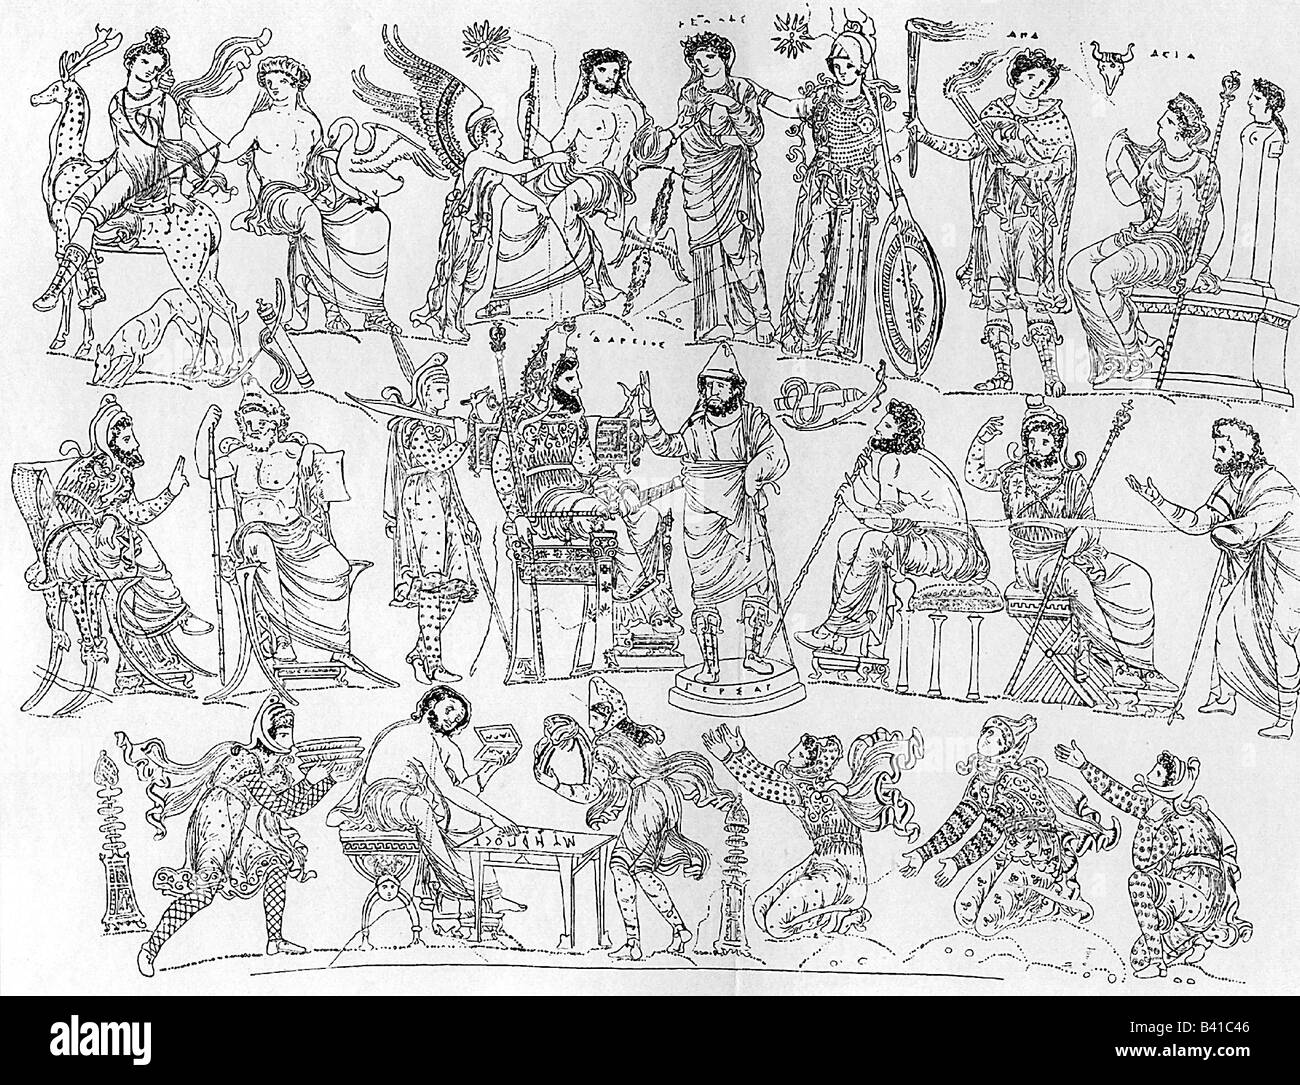 Darius I, 549 - 486 BC, Great King of Persia 522 - 486 BC, war council, drawing, 19th century, after the so-called Darius Vase, 3rd century BC, from Canosa, National Museum Naples, Stock Photo